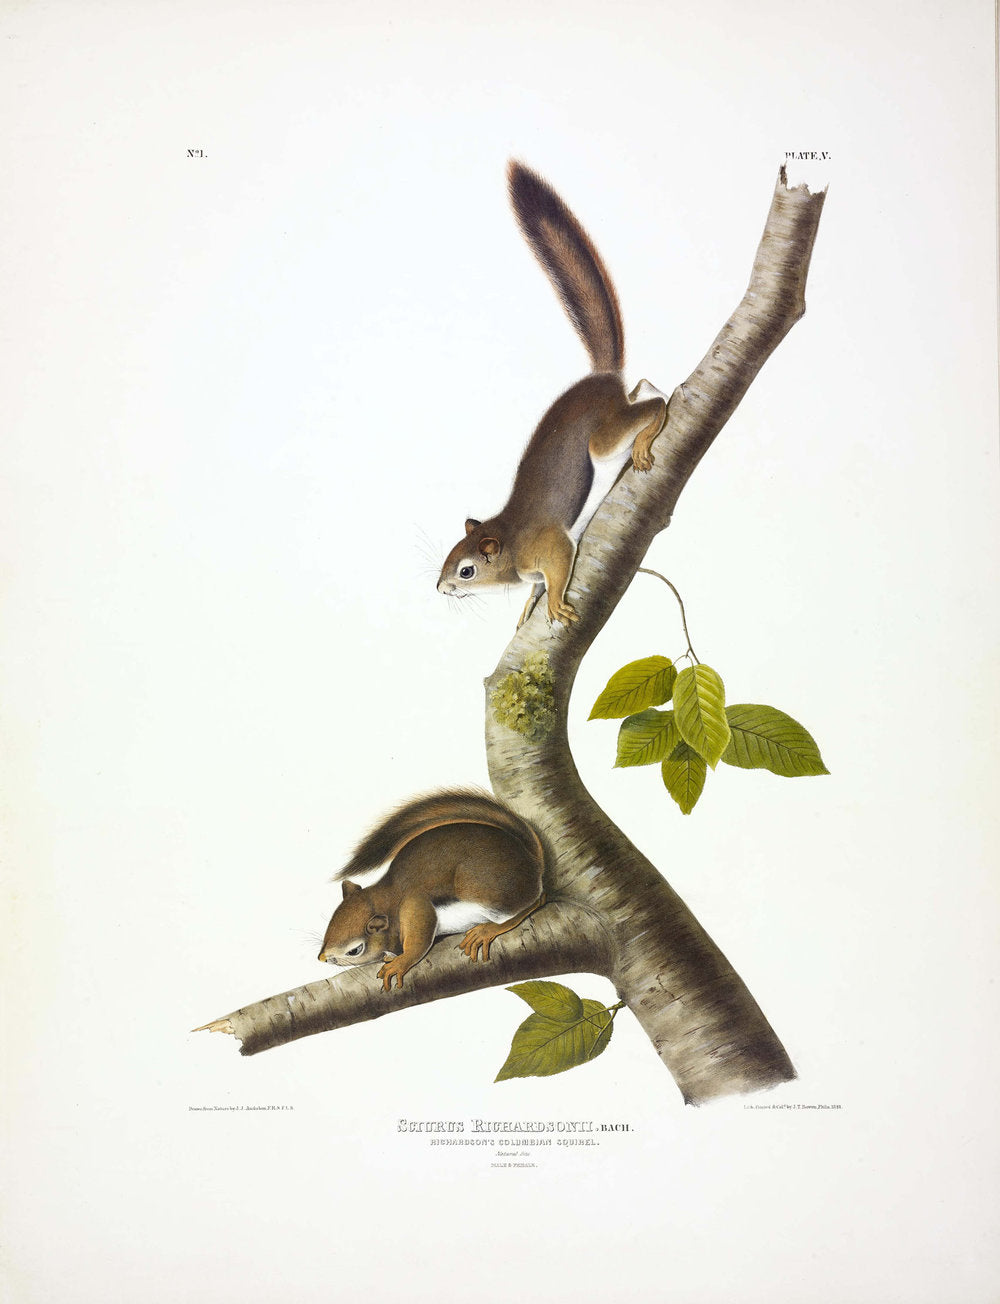 Painted by John James Audubon (1785-1851) with background likely by Victor Gifford Audubon (1809-1860)  Plate V - Richardson's Columbia Squirrel  From: Viviparous Quadrupeds of North America  New York: 1845-1848  Hand colored lithograph  Sheet size: 21 ¼” x 27”